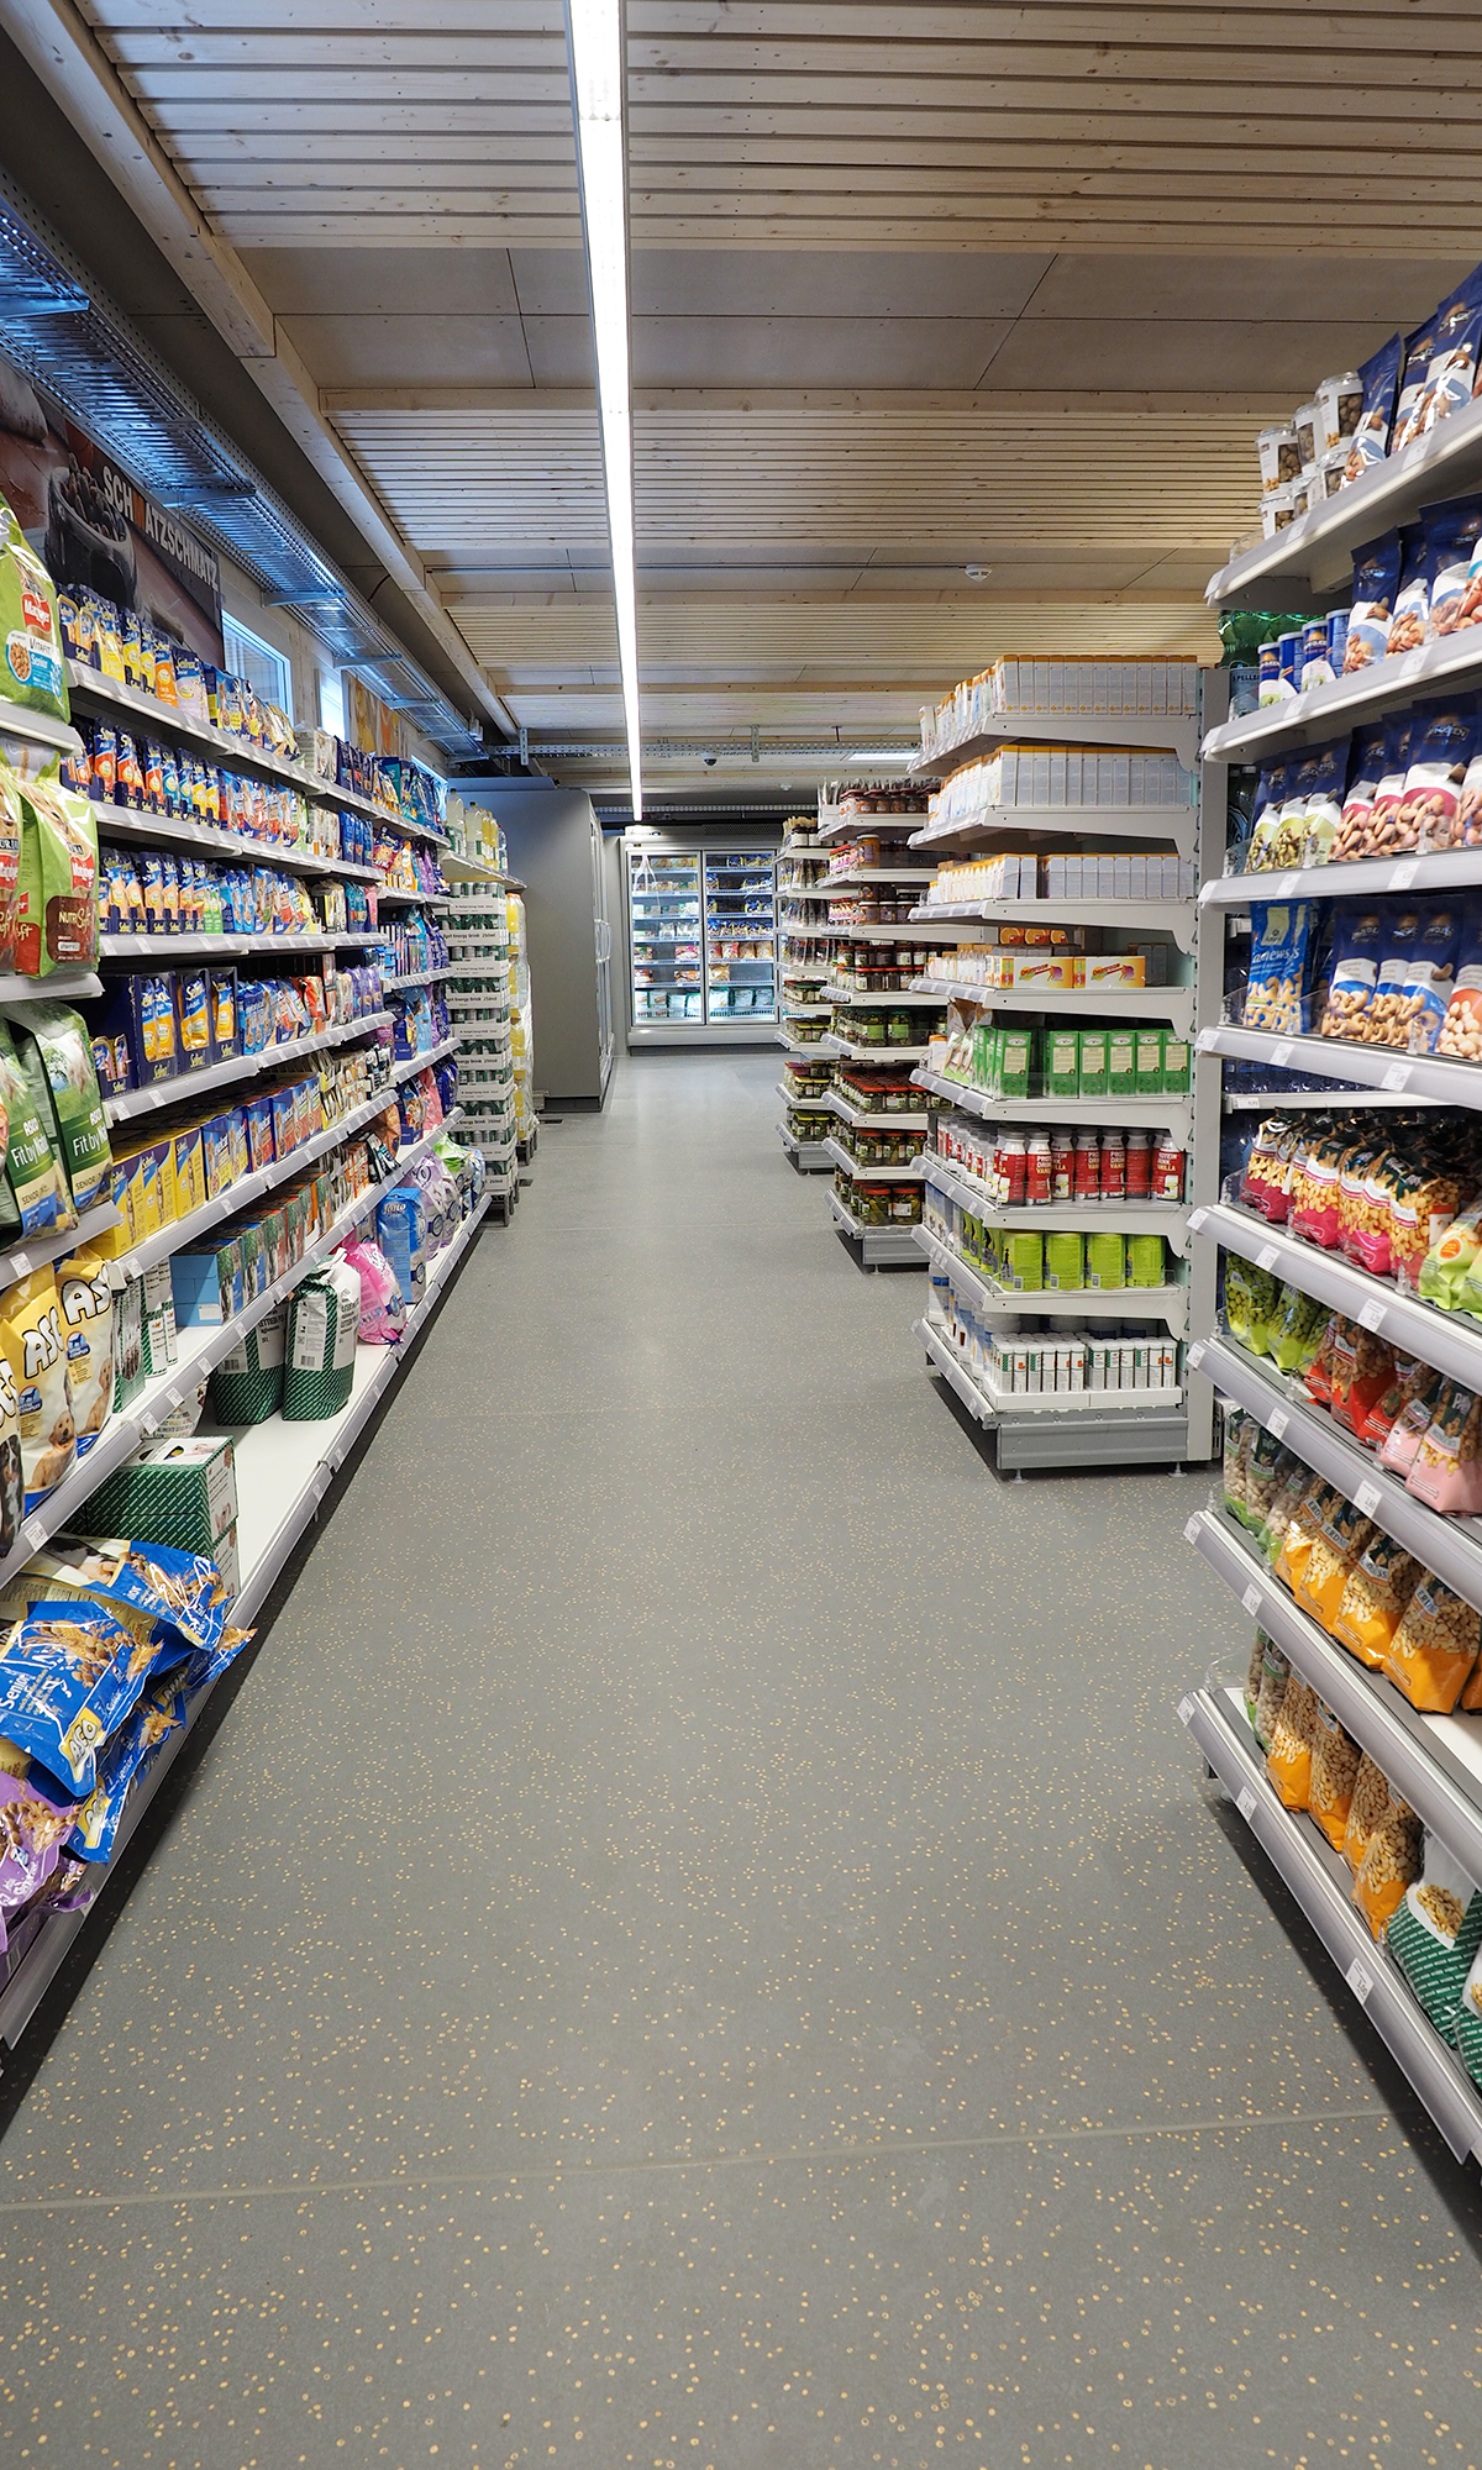 Interior view of the Migros temporary store; corridor with shelves on both sides.